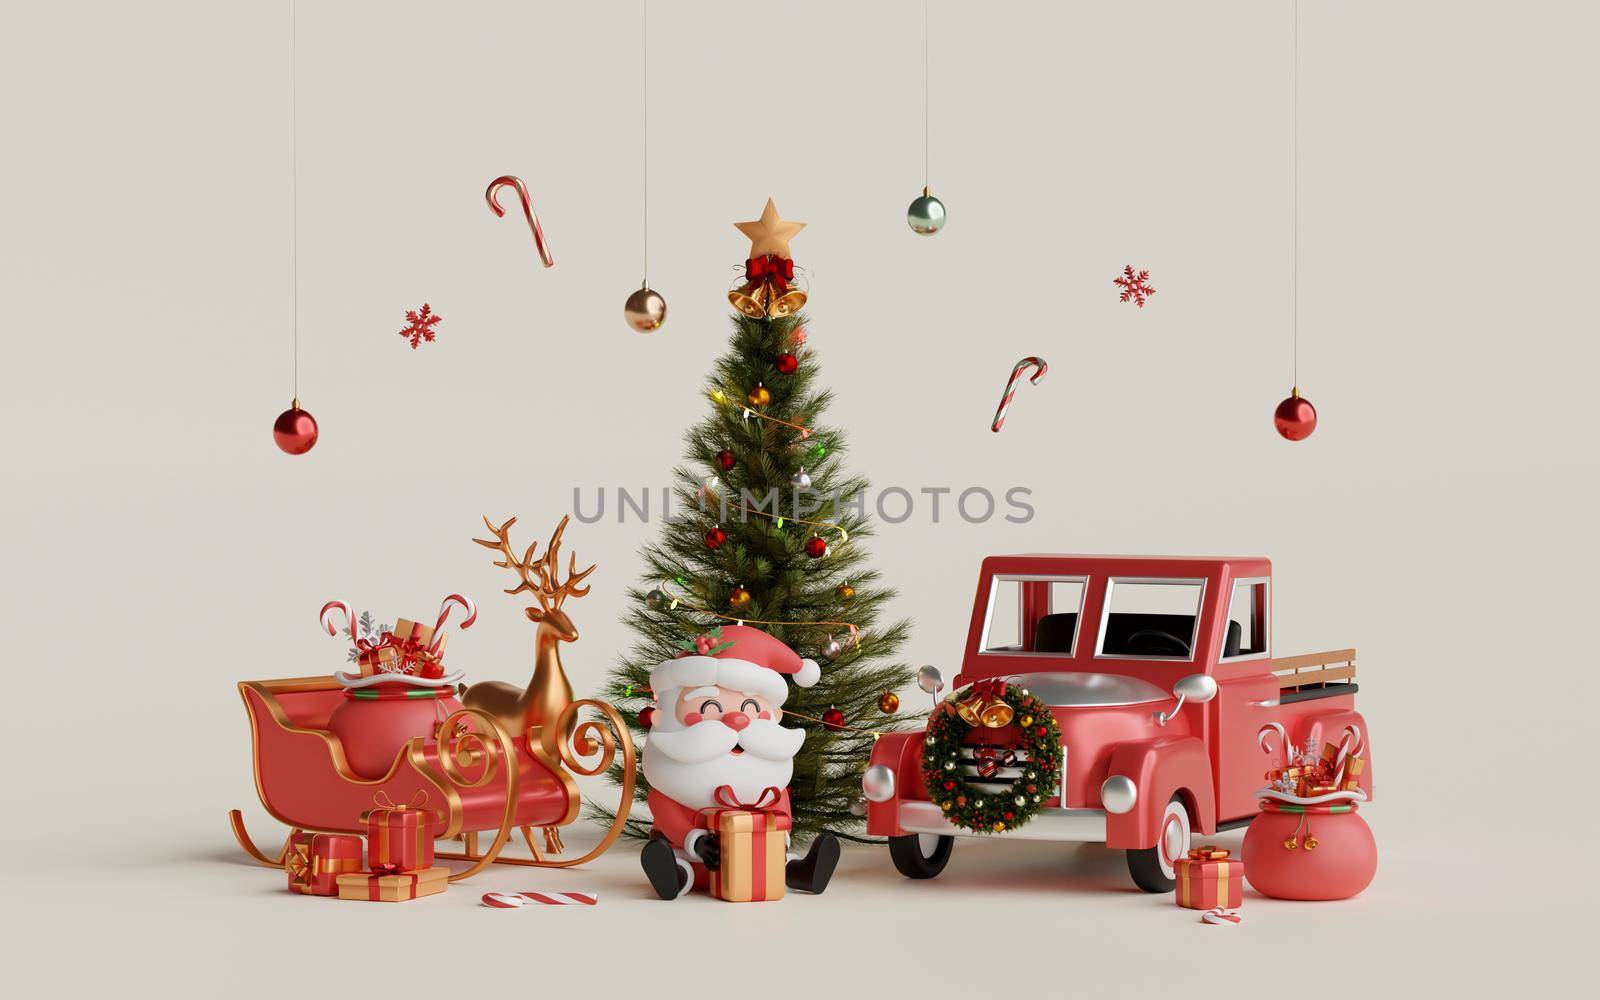 Christmas 3d illustration of Christmas celebration with Santa Claus and Christmas decoration by nutzchotwarut